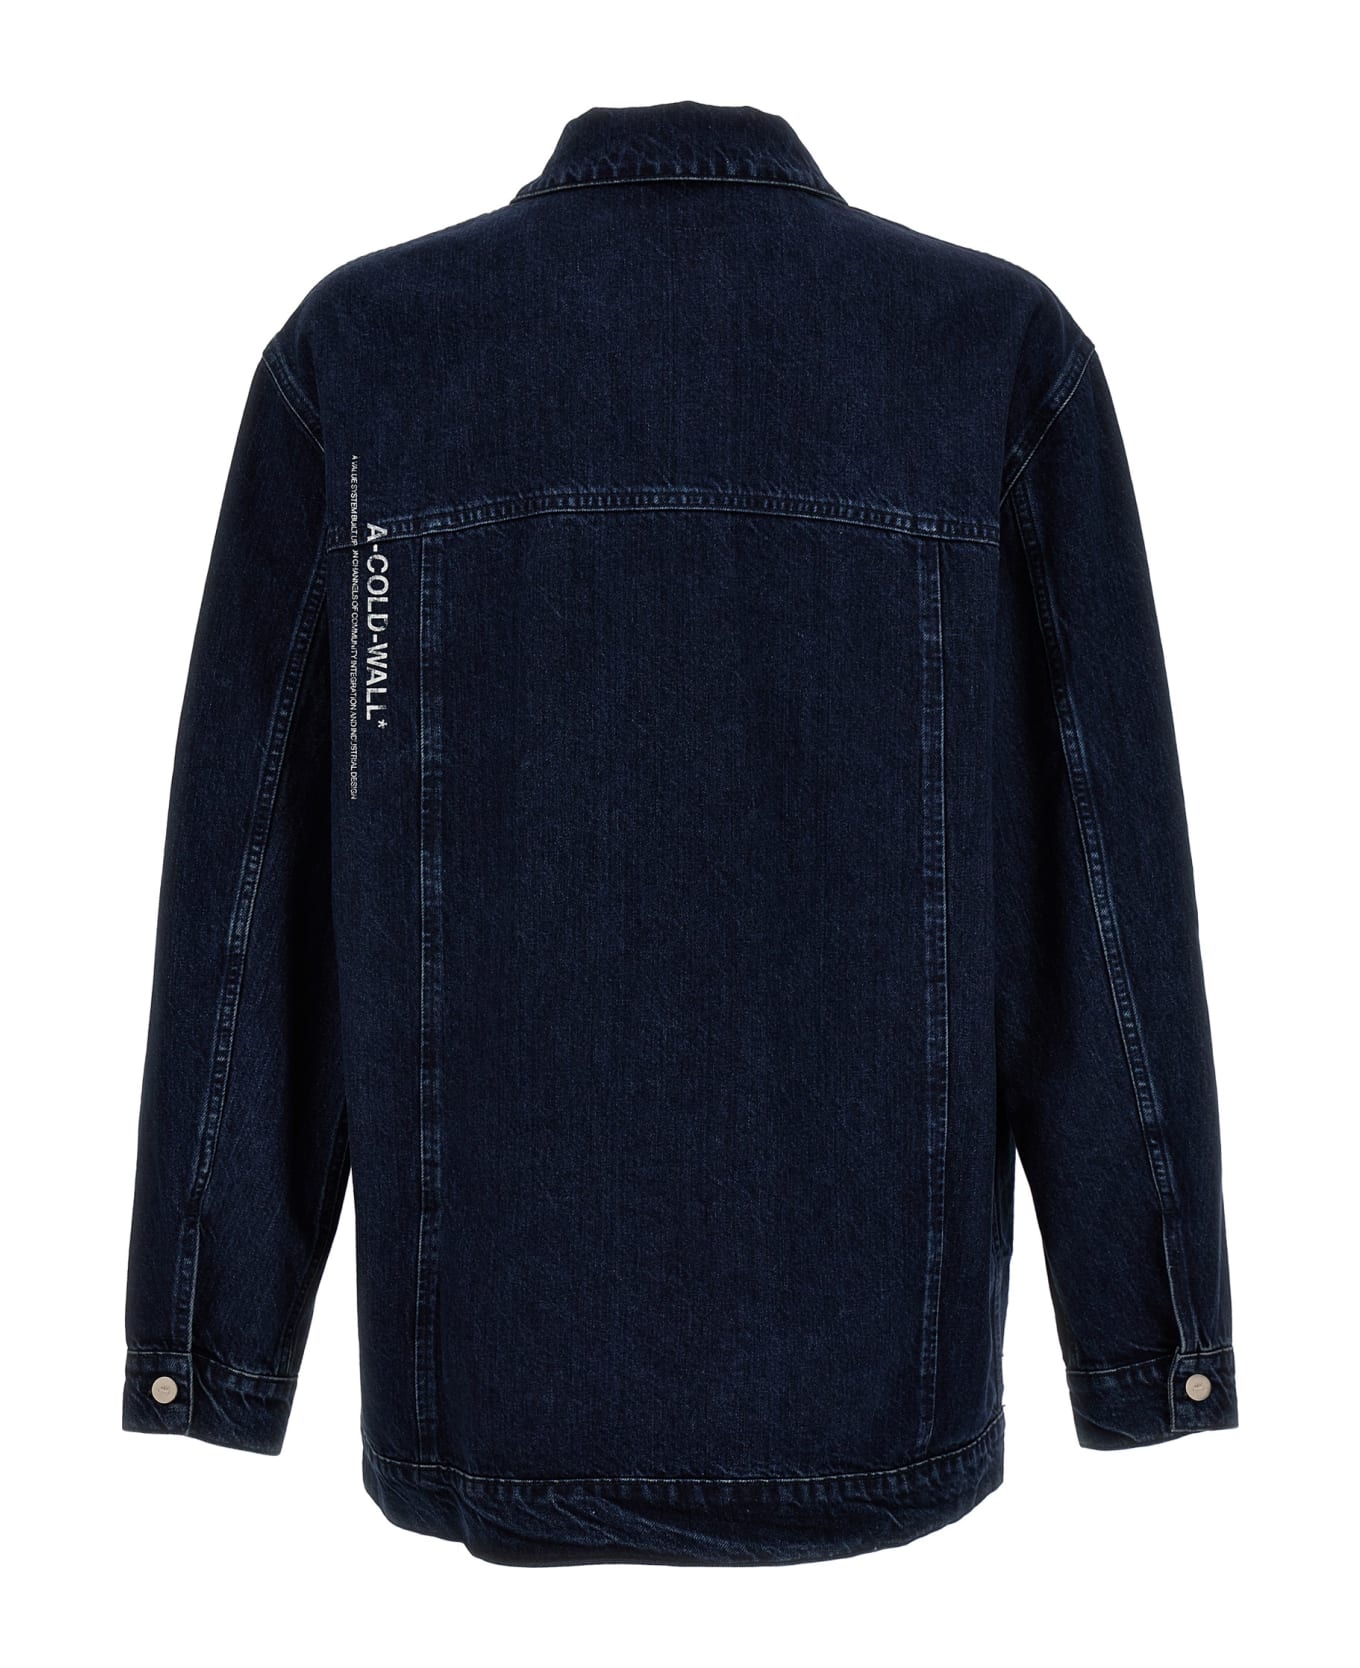 A-COLD-WALL 'discourse Chore' Jacket - Blue